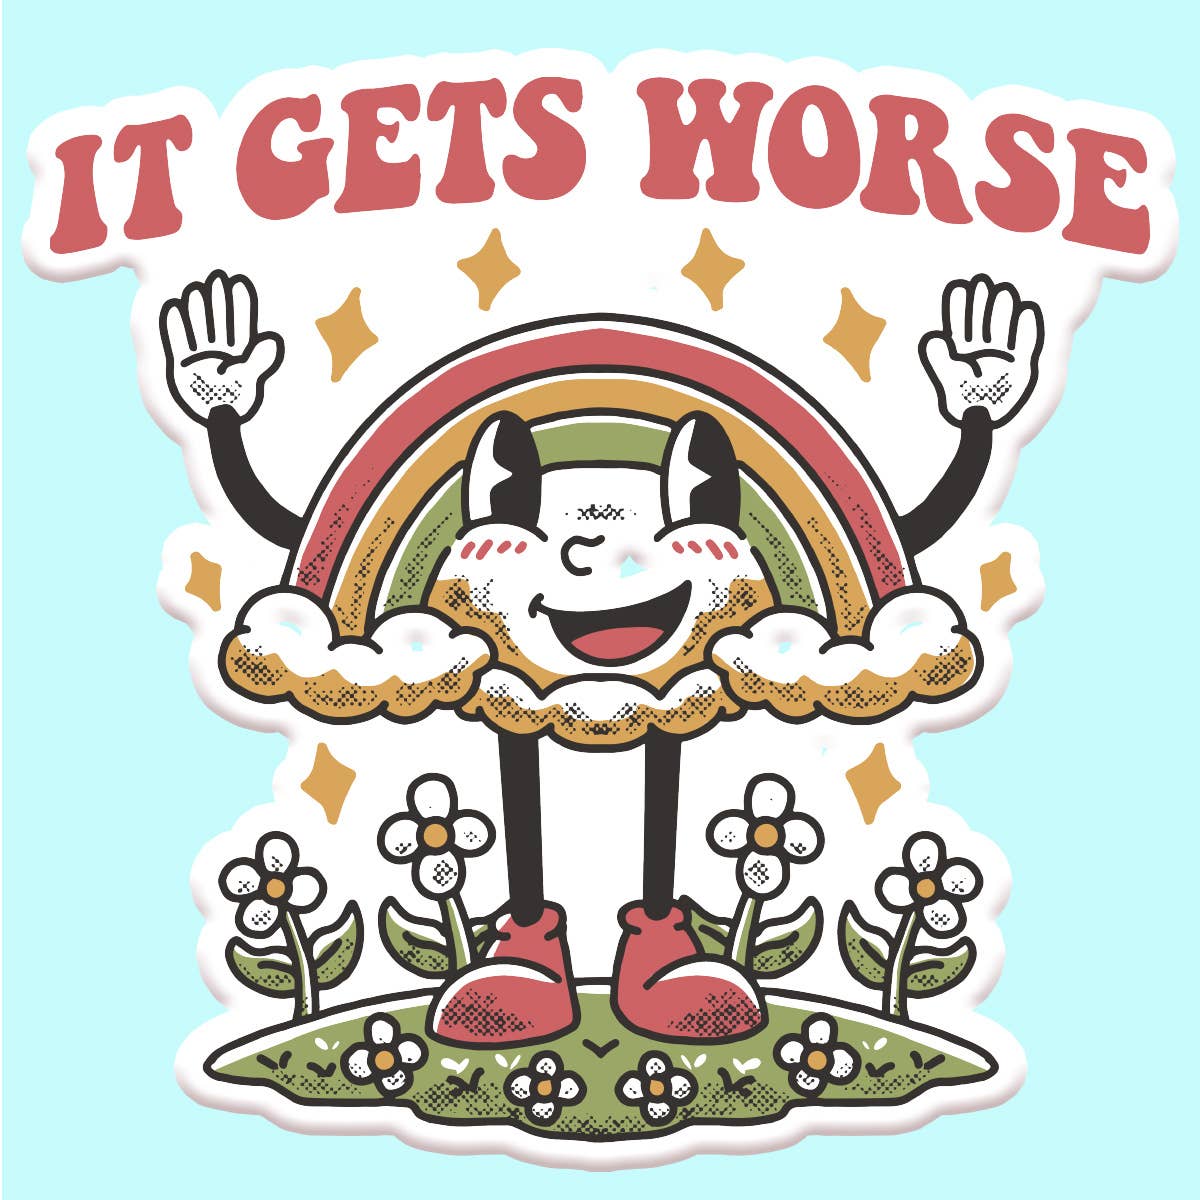 It Gets Worse Funny Sticker Decal